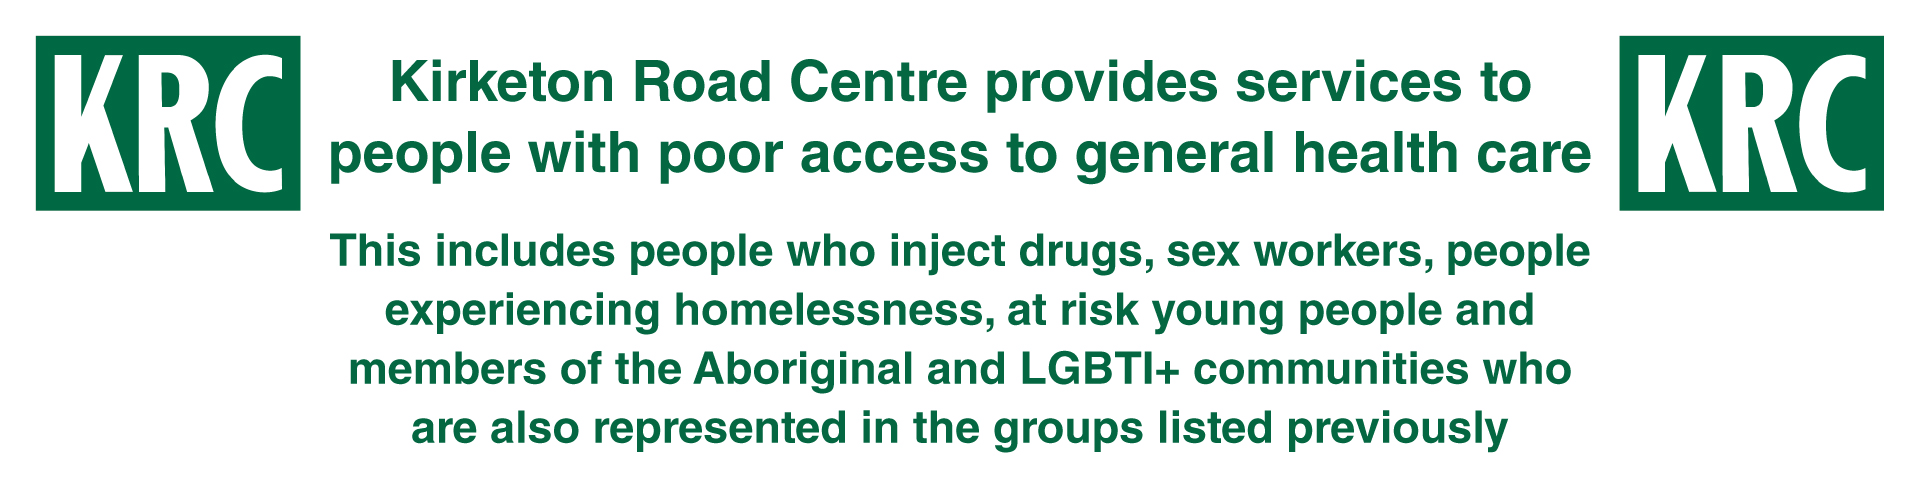 Kirketon Road Centre provides services to people with poor access to general health care. This includes people who inject drugs, sex workers, people experiencing homelessness, at risk young people and members of the Aboriginal and LGBTI+ communities who are also represented in the groups listed previously.